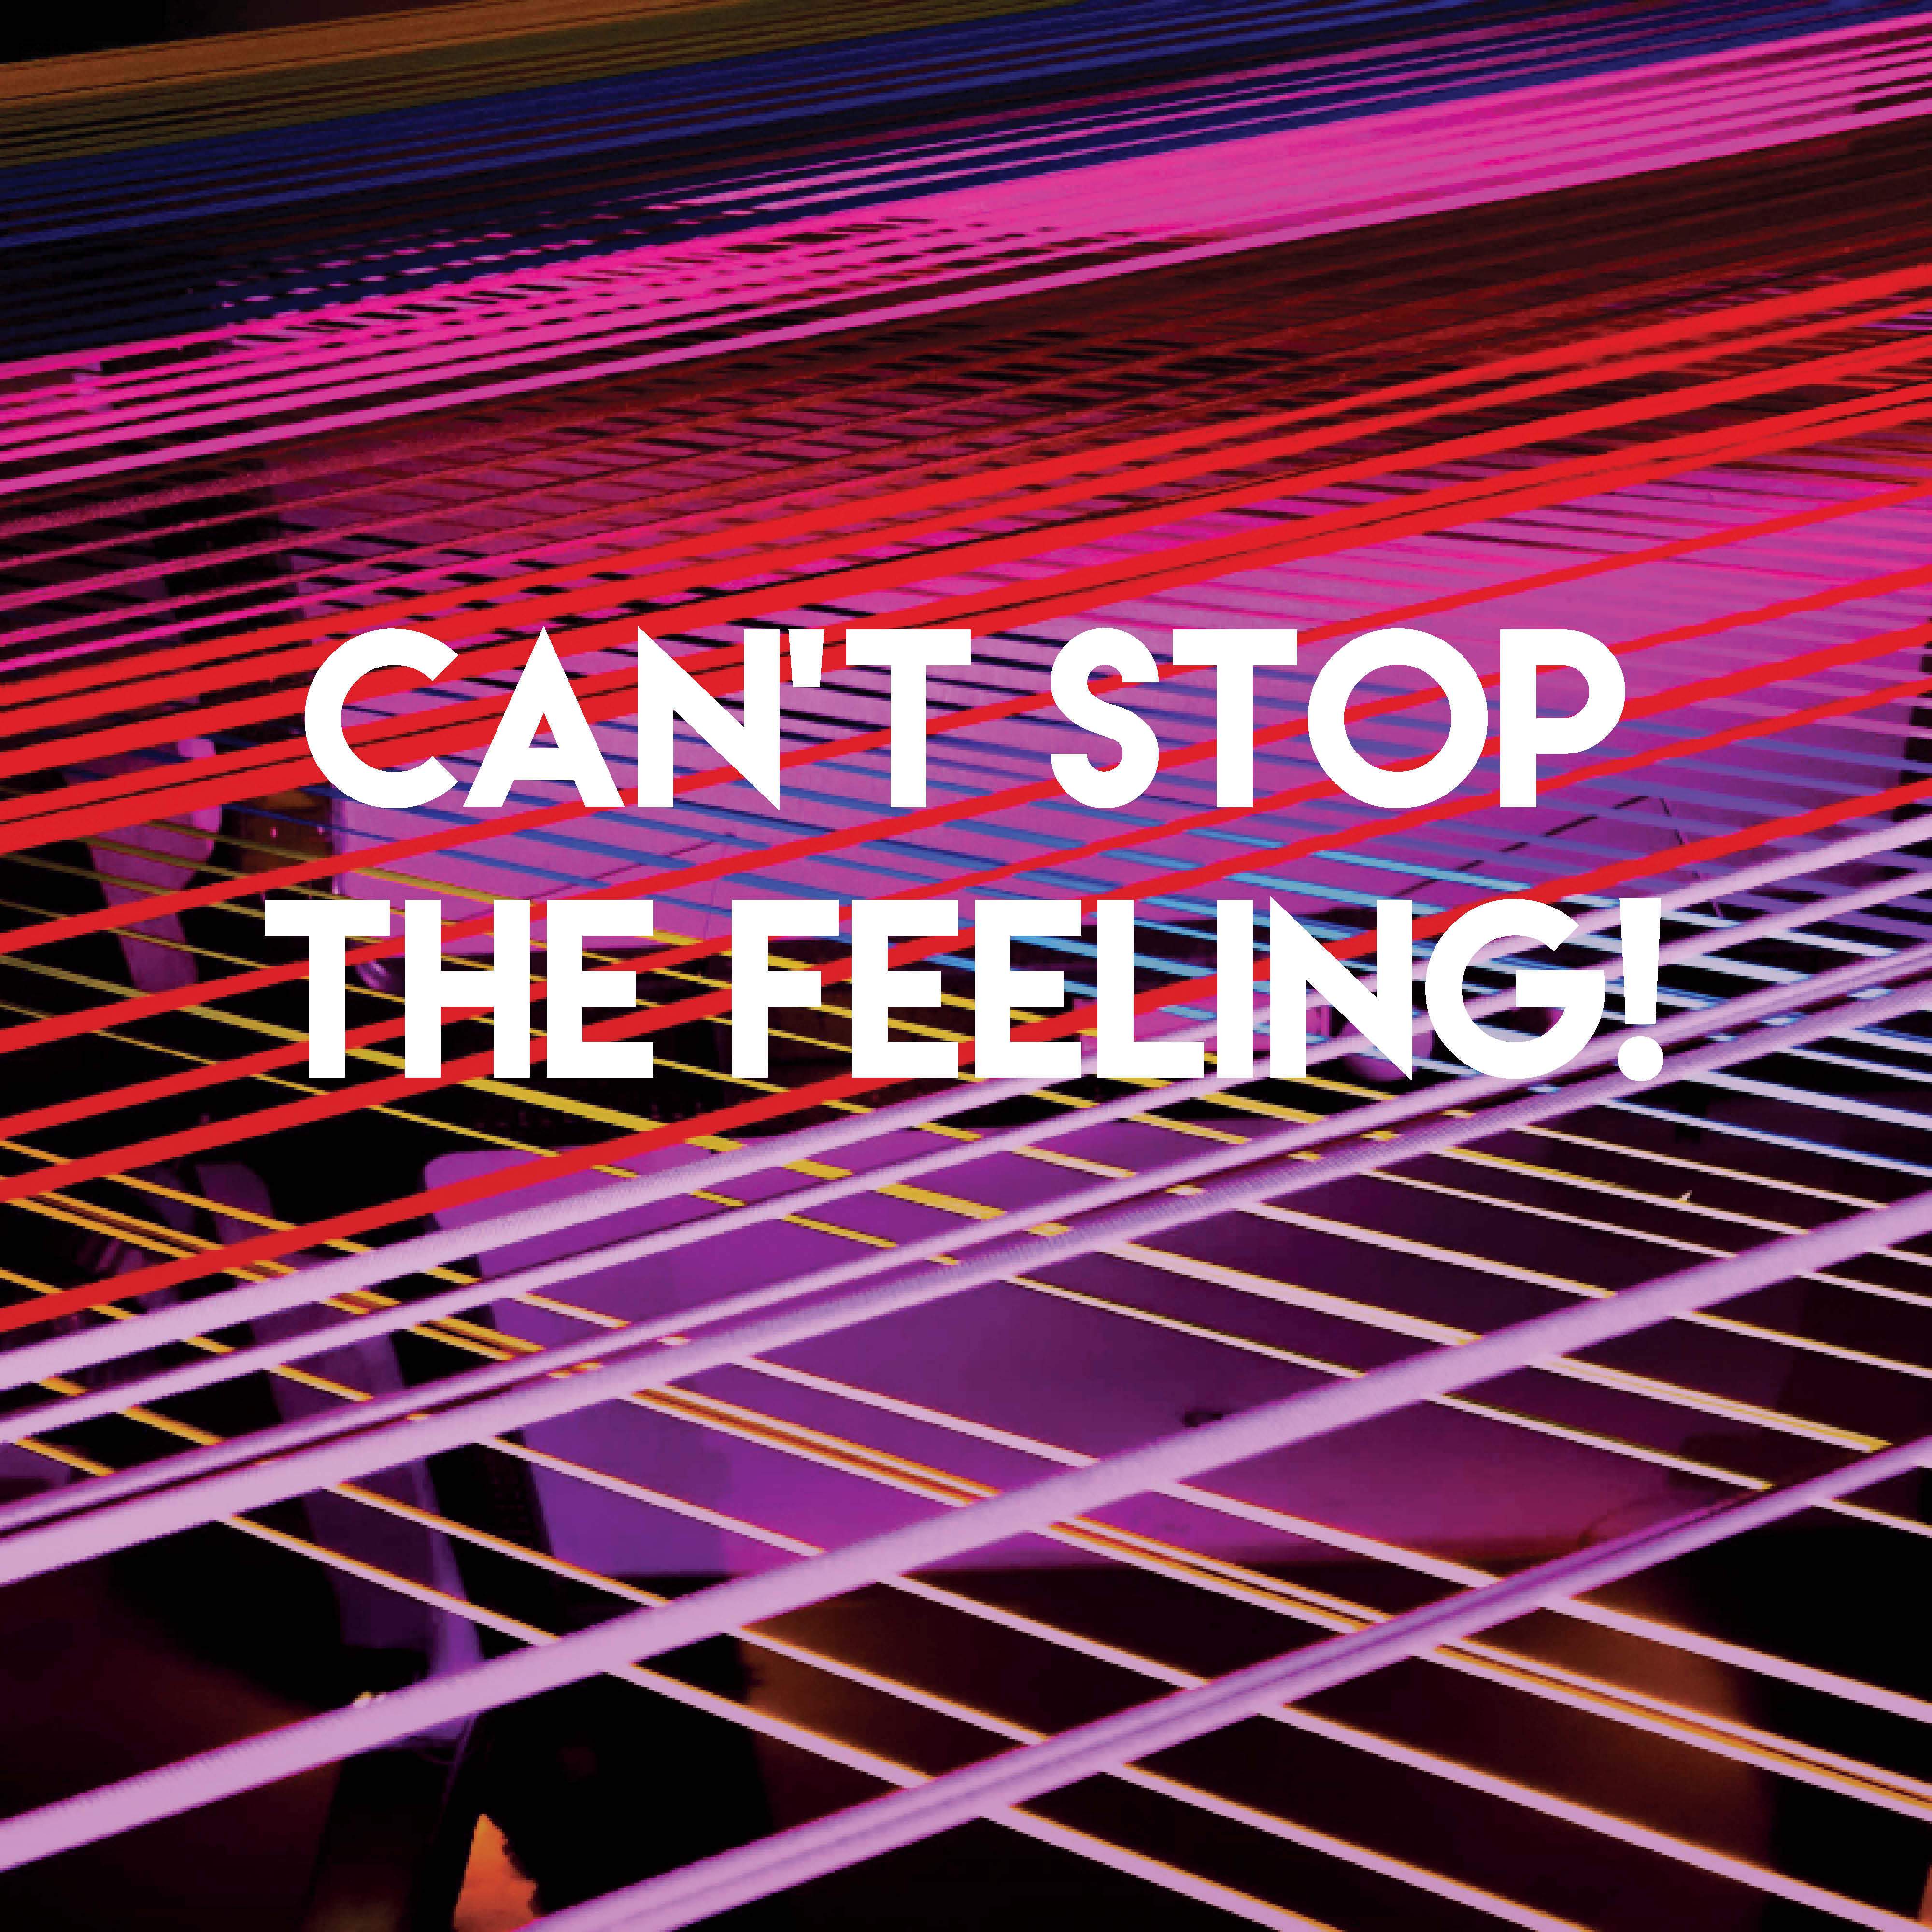 Can't Stop the Feeling!